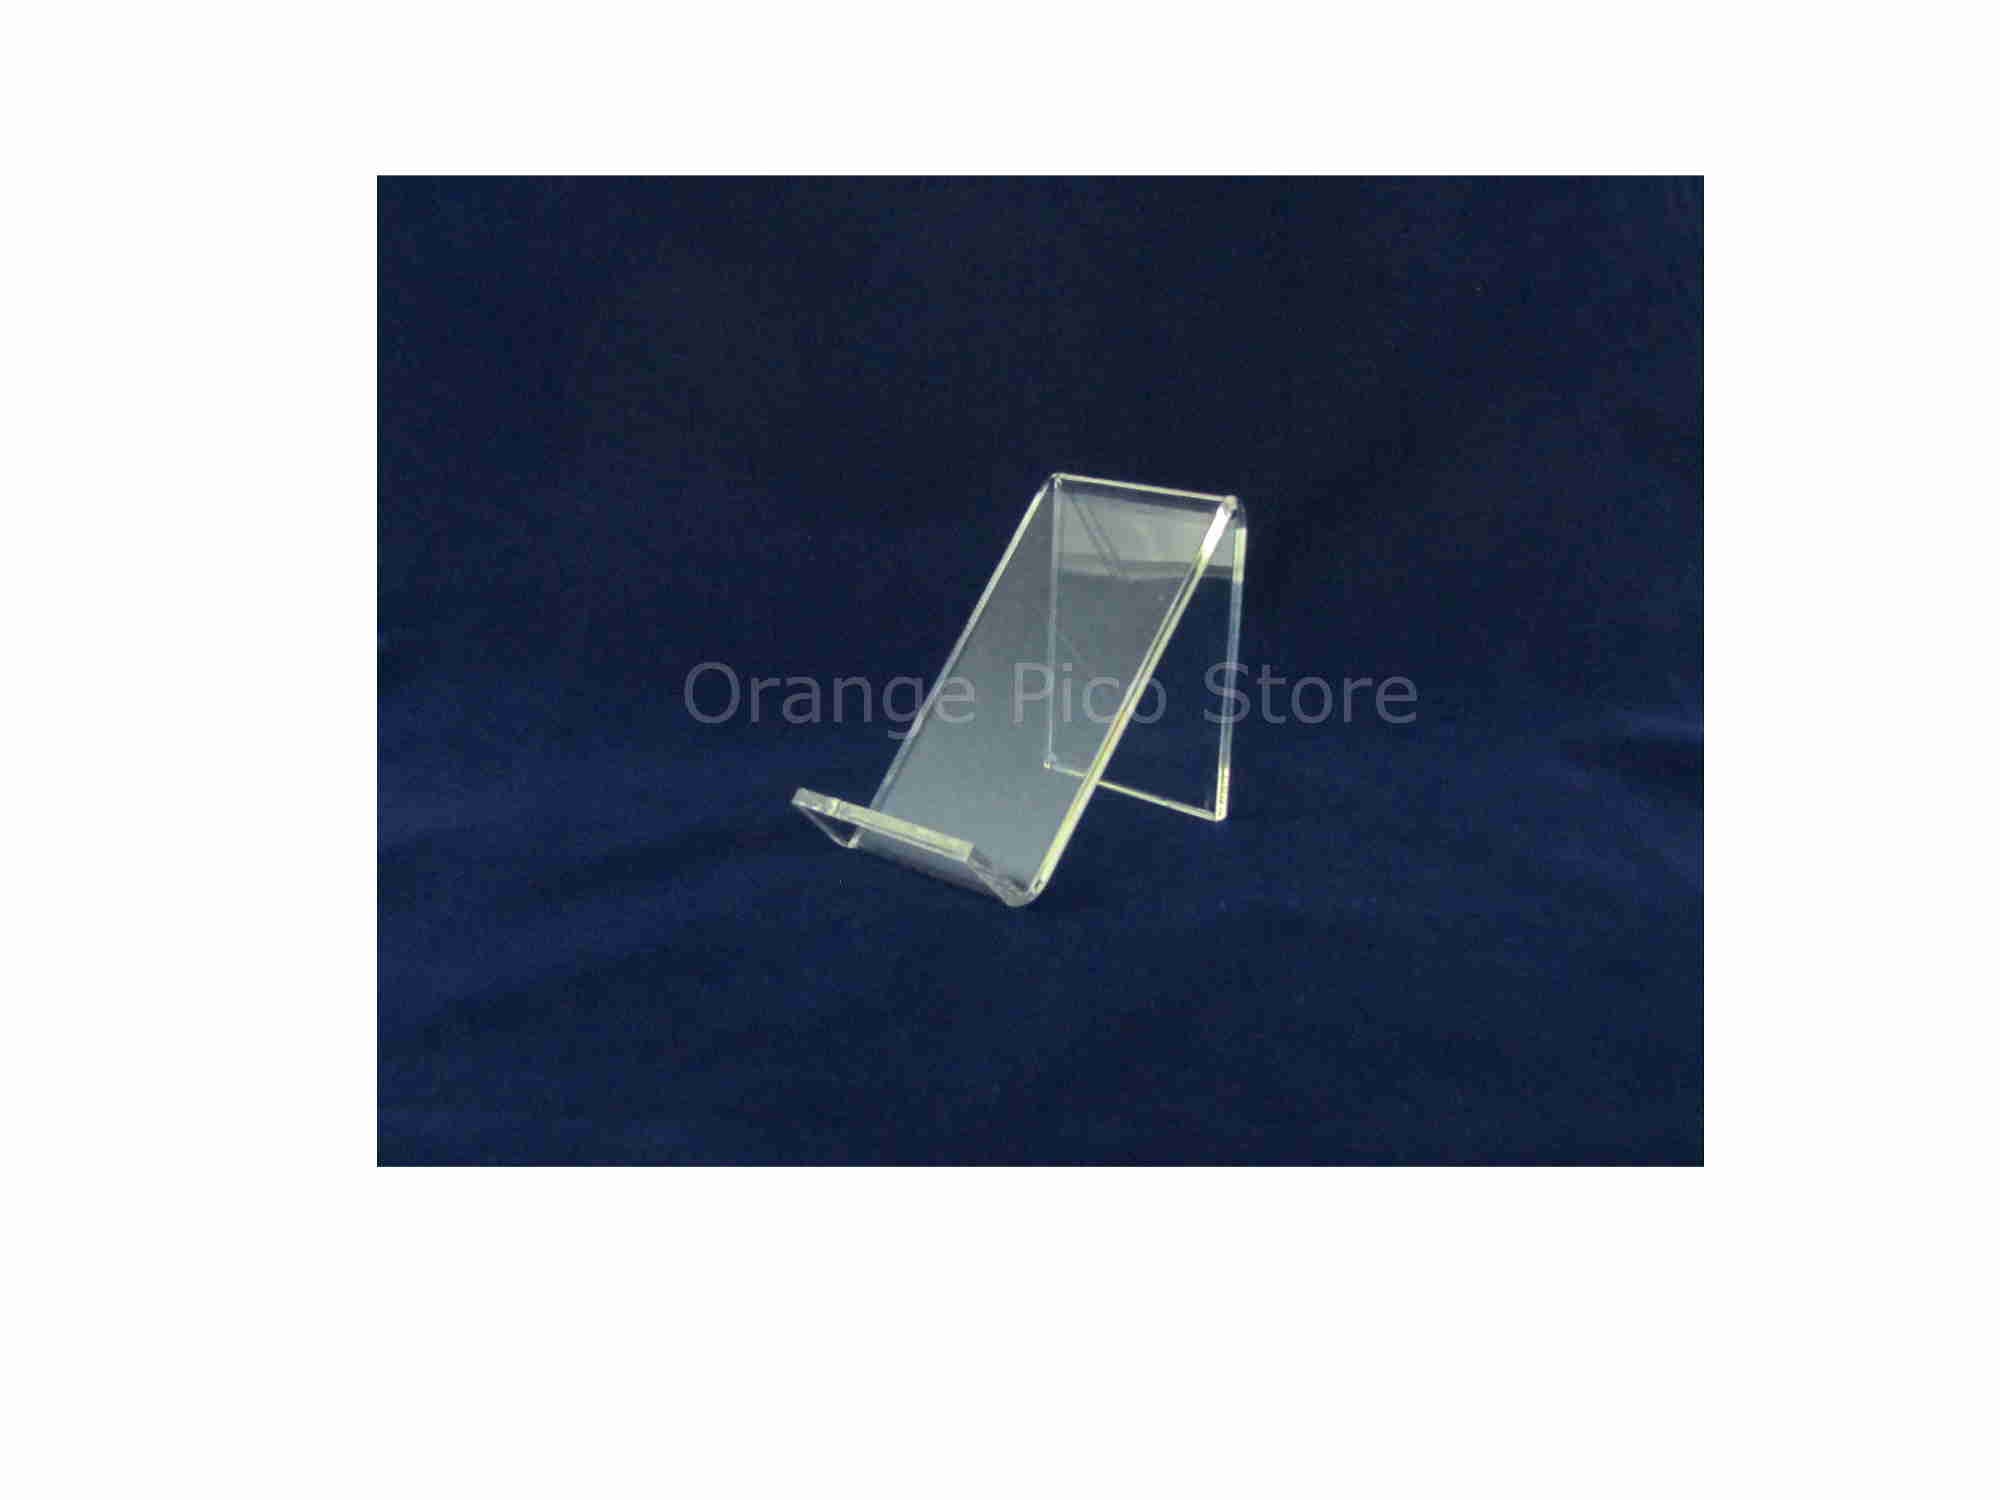 Acrylic Cell Phone Display 3/16"T